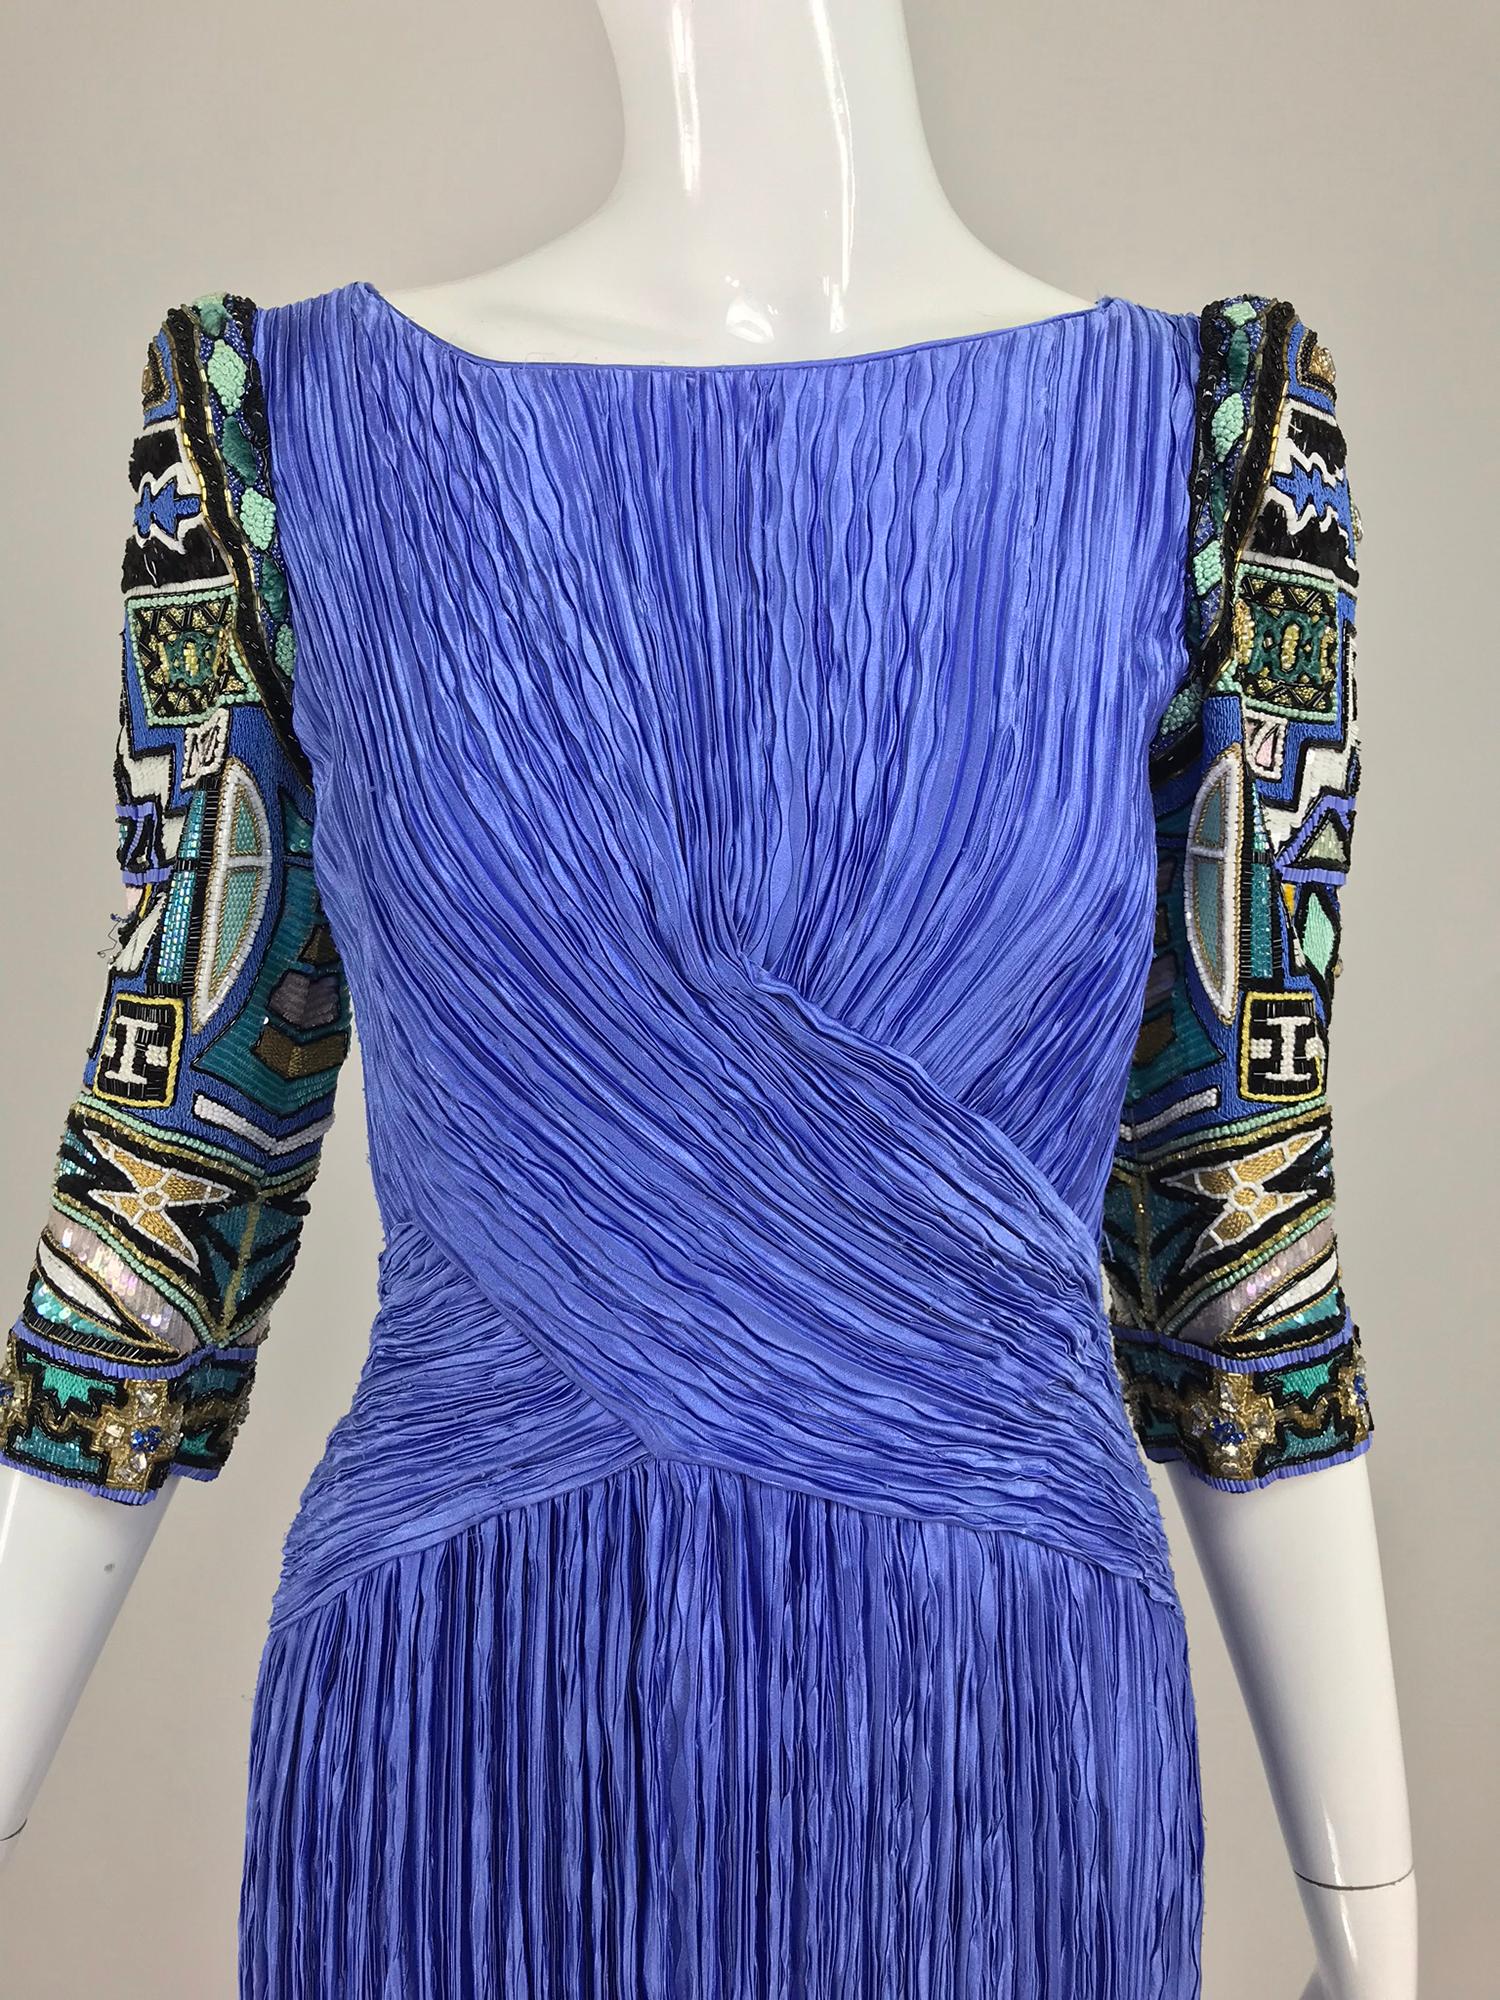 Mary McFadden Couture art beaded pleated evening gown in blue from the 1980s. This beautiful gown in a shade of blue like cornflower, has the most amazing beaded sleeves. It is an earlier gown and the sleeves are peaked at the shoulder so there is